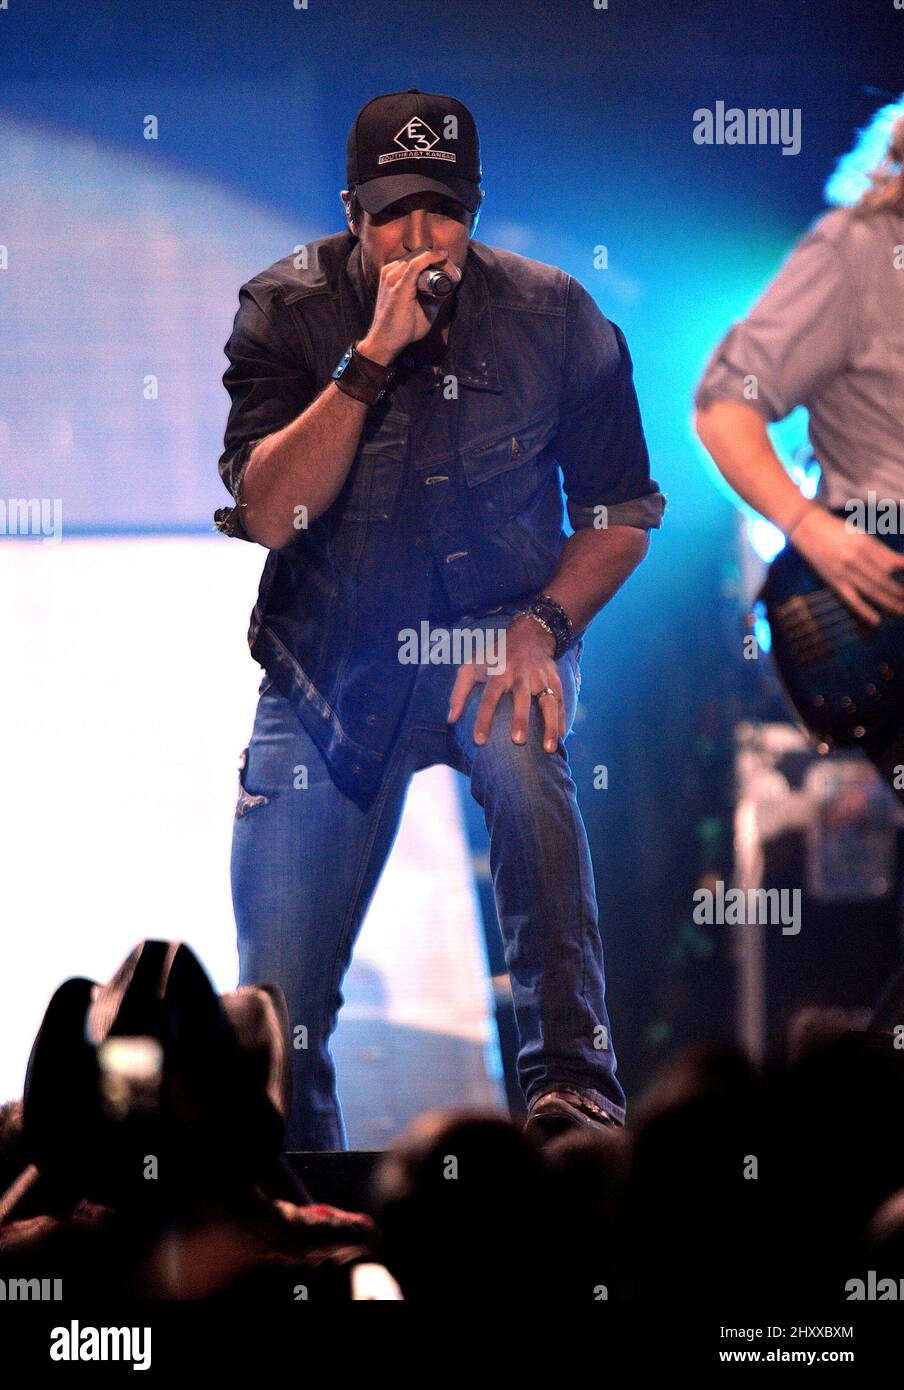 Luke Bryan during the 2012 My Kinda Party Tour stops at the Crown Coliseum, North Carolina Stock Photo